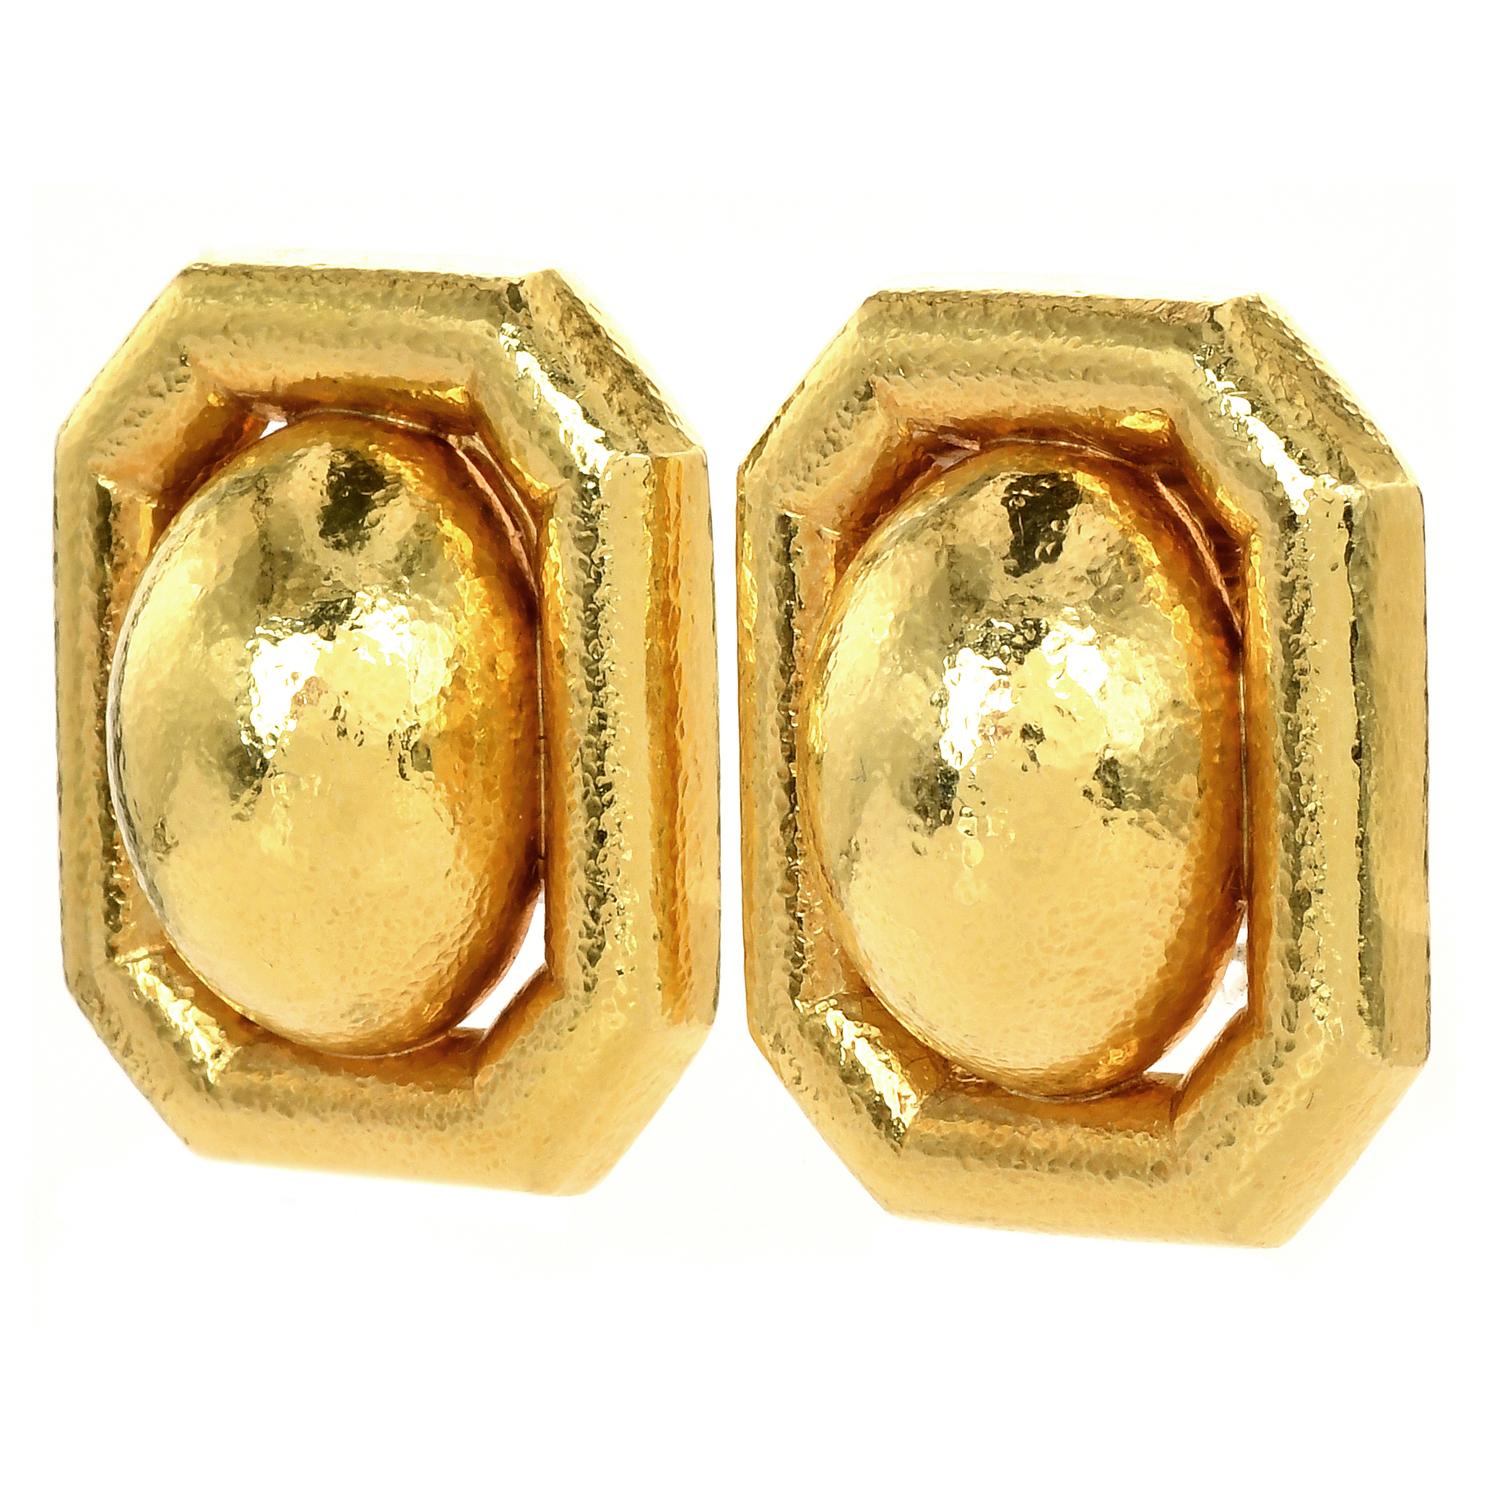 Stand Out with these Chic earrings, from New York's best David Webb,

Crafted in Solid 18K Yellow Gold, Hand Hammer the color is enhanced by a textured high Polish Finish. They measure approximately 32mm x25mm, are secured with clip-on backings for